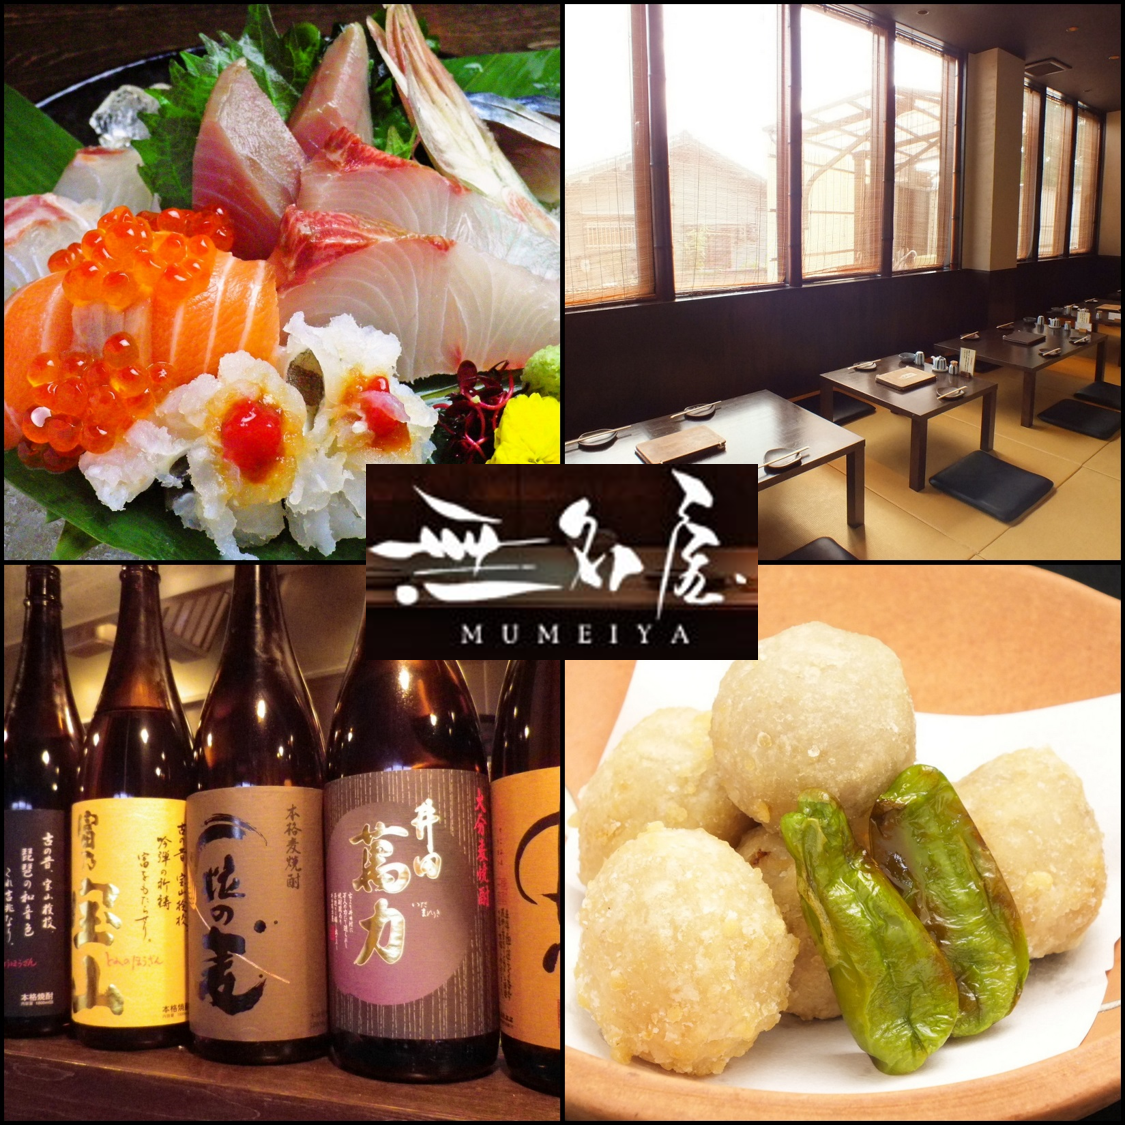 Food and sake that you can enjoy reasonably in a comfortable space.A variety of dishes that make the best use of seasonal ingredients.